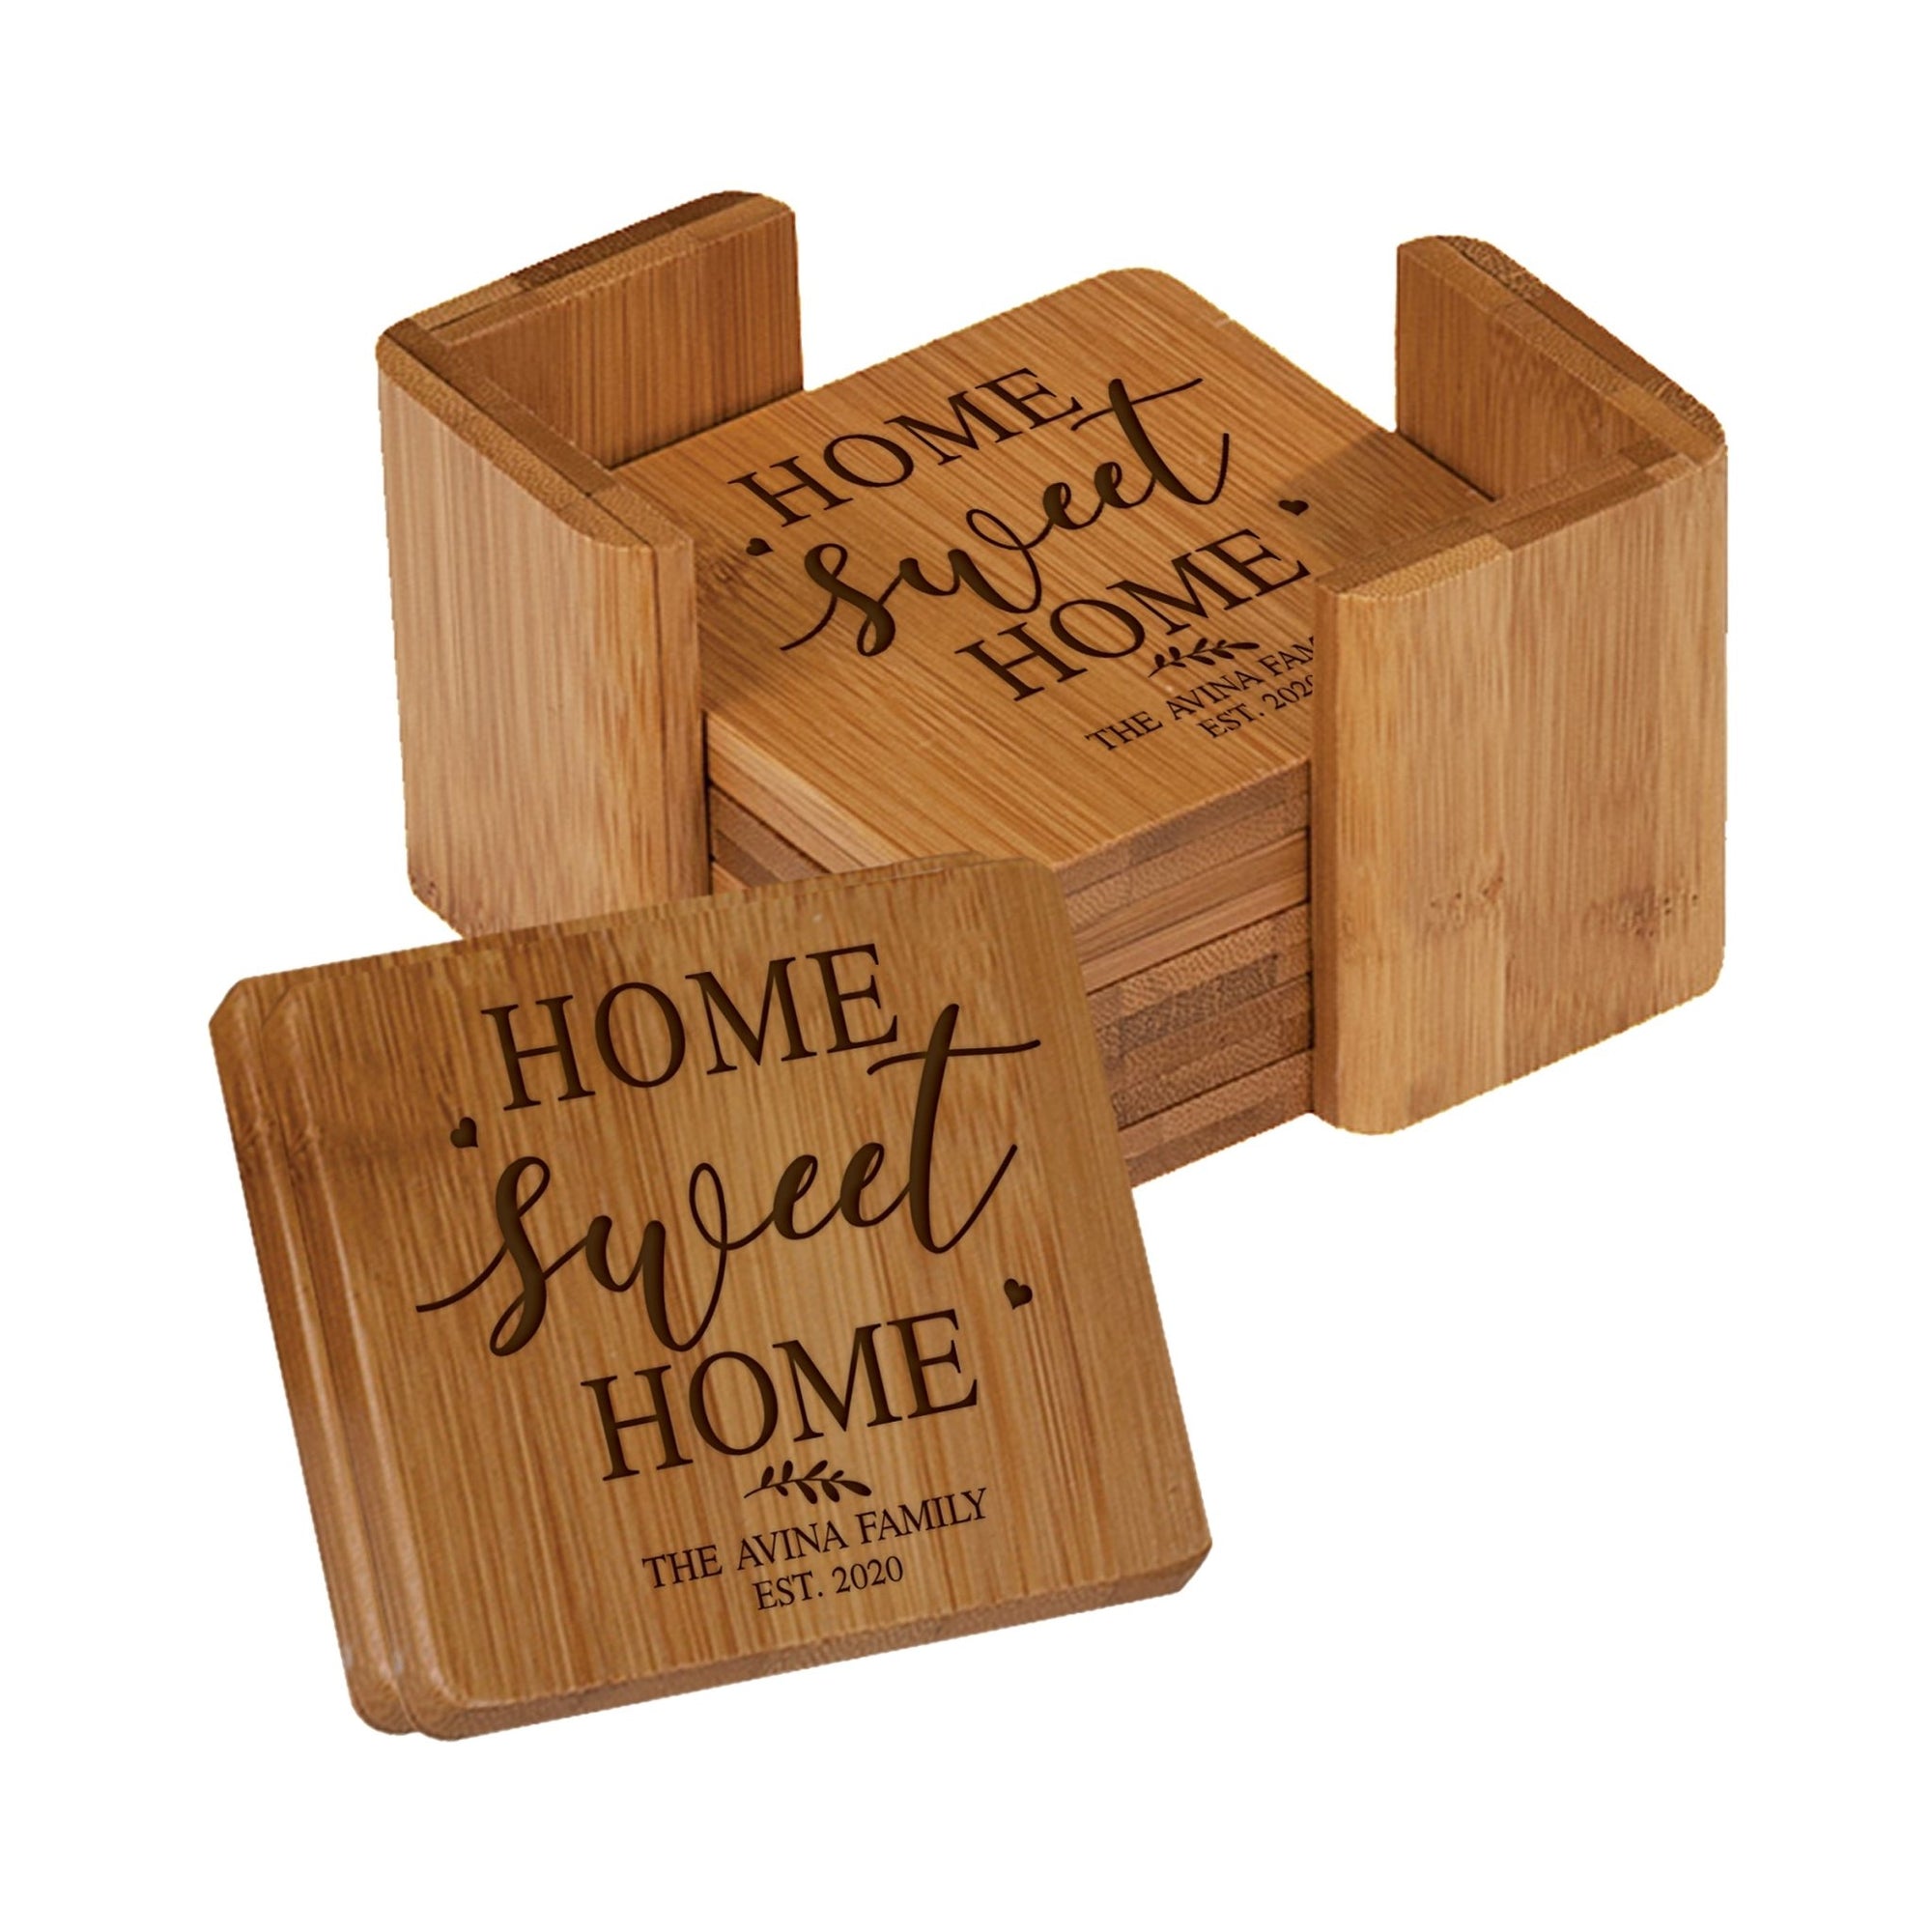 Personalized Family Home 6pc Solid Bamboo Coaster Set With Holder 4.5x4.5 – Home Sweet Home - LifeSong Milestones